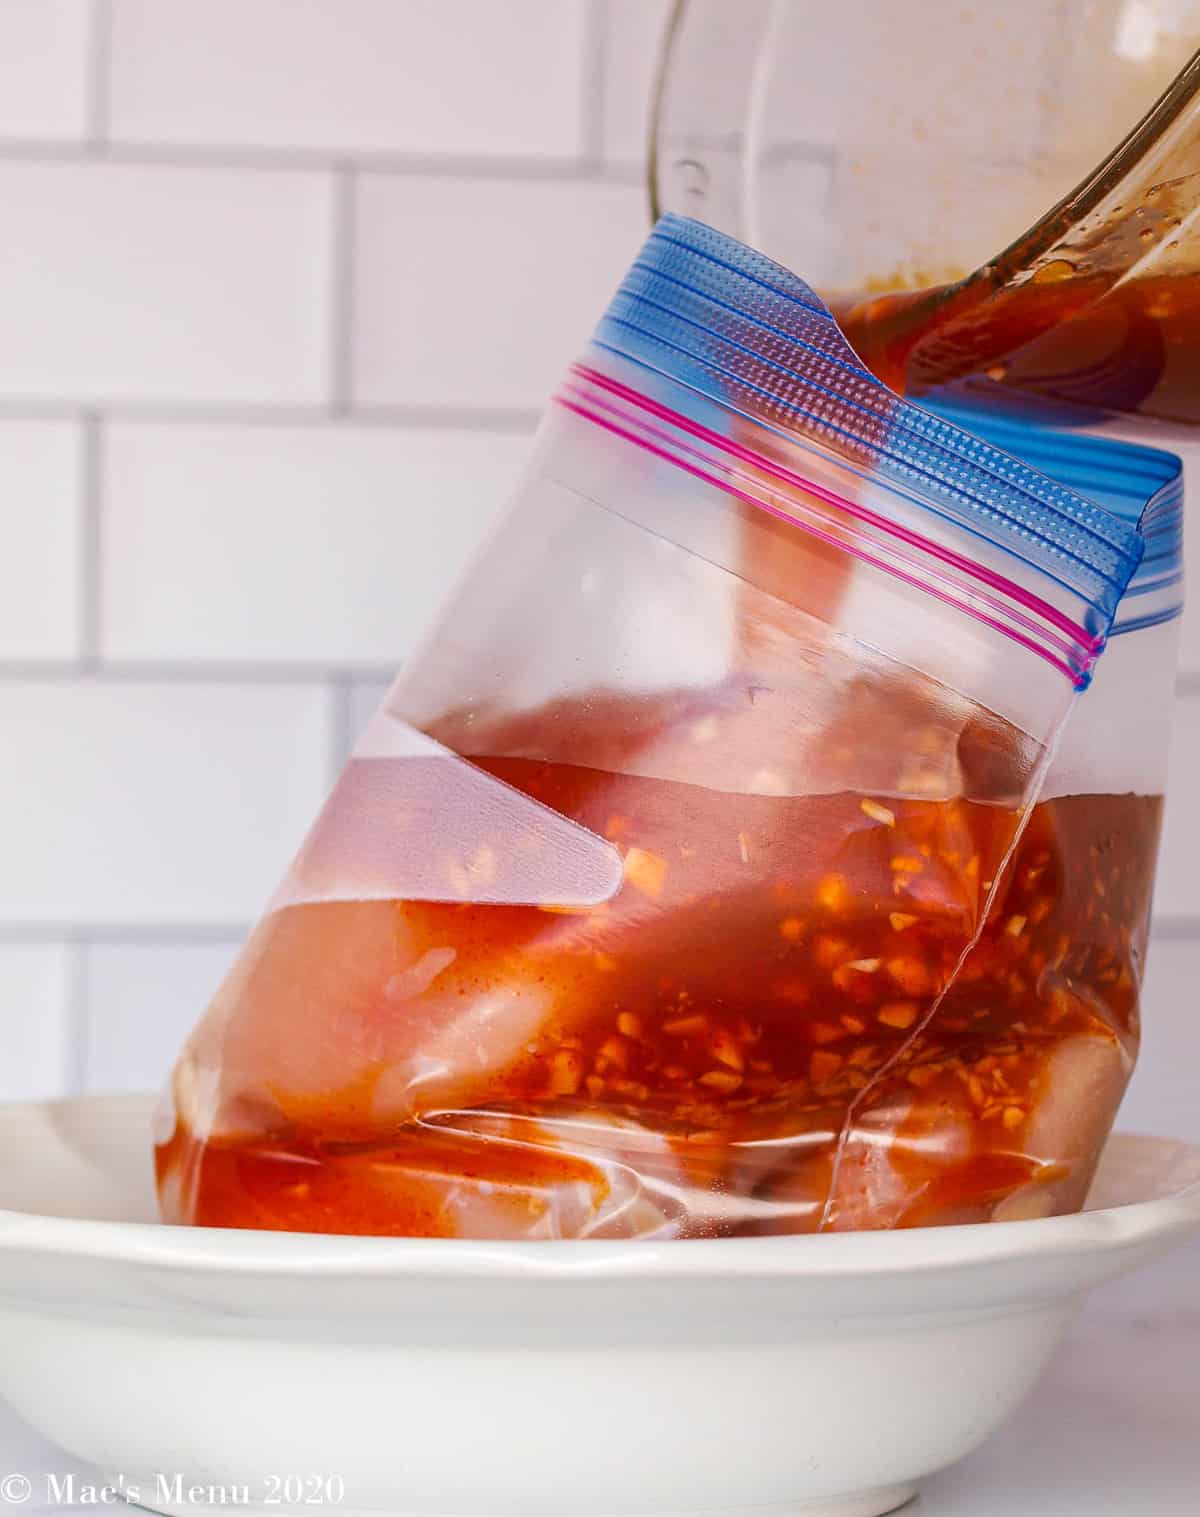 Pouring the marinade into a ziploc bag with the chicken